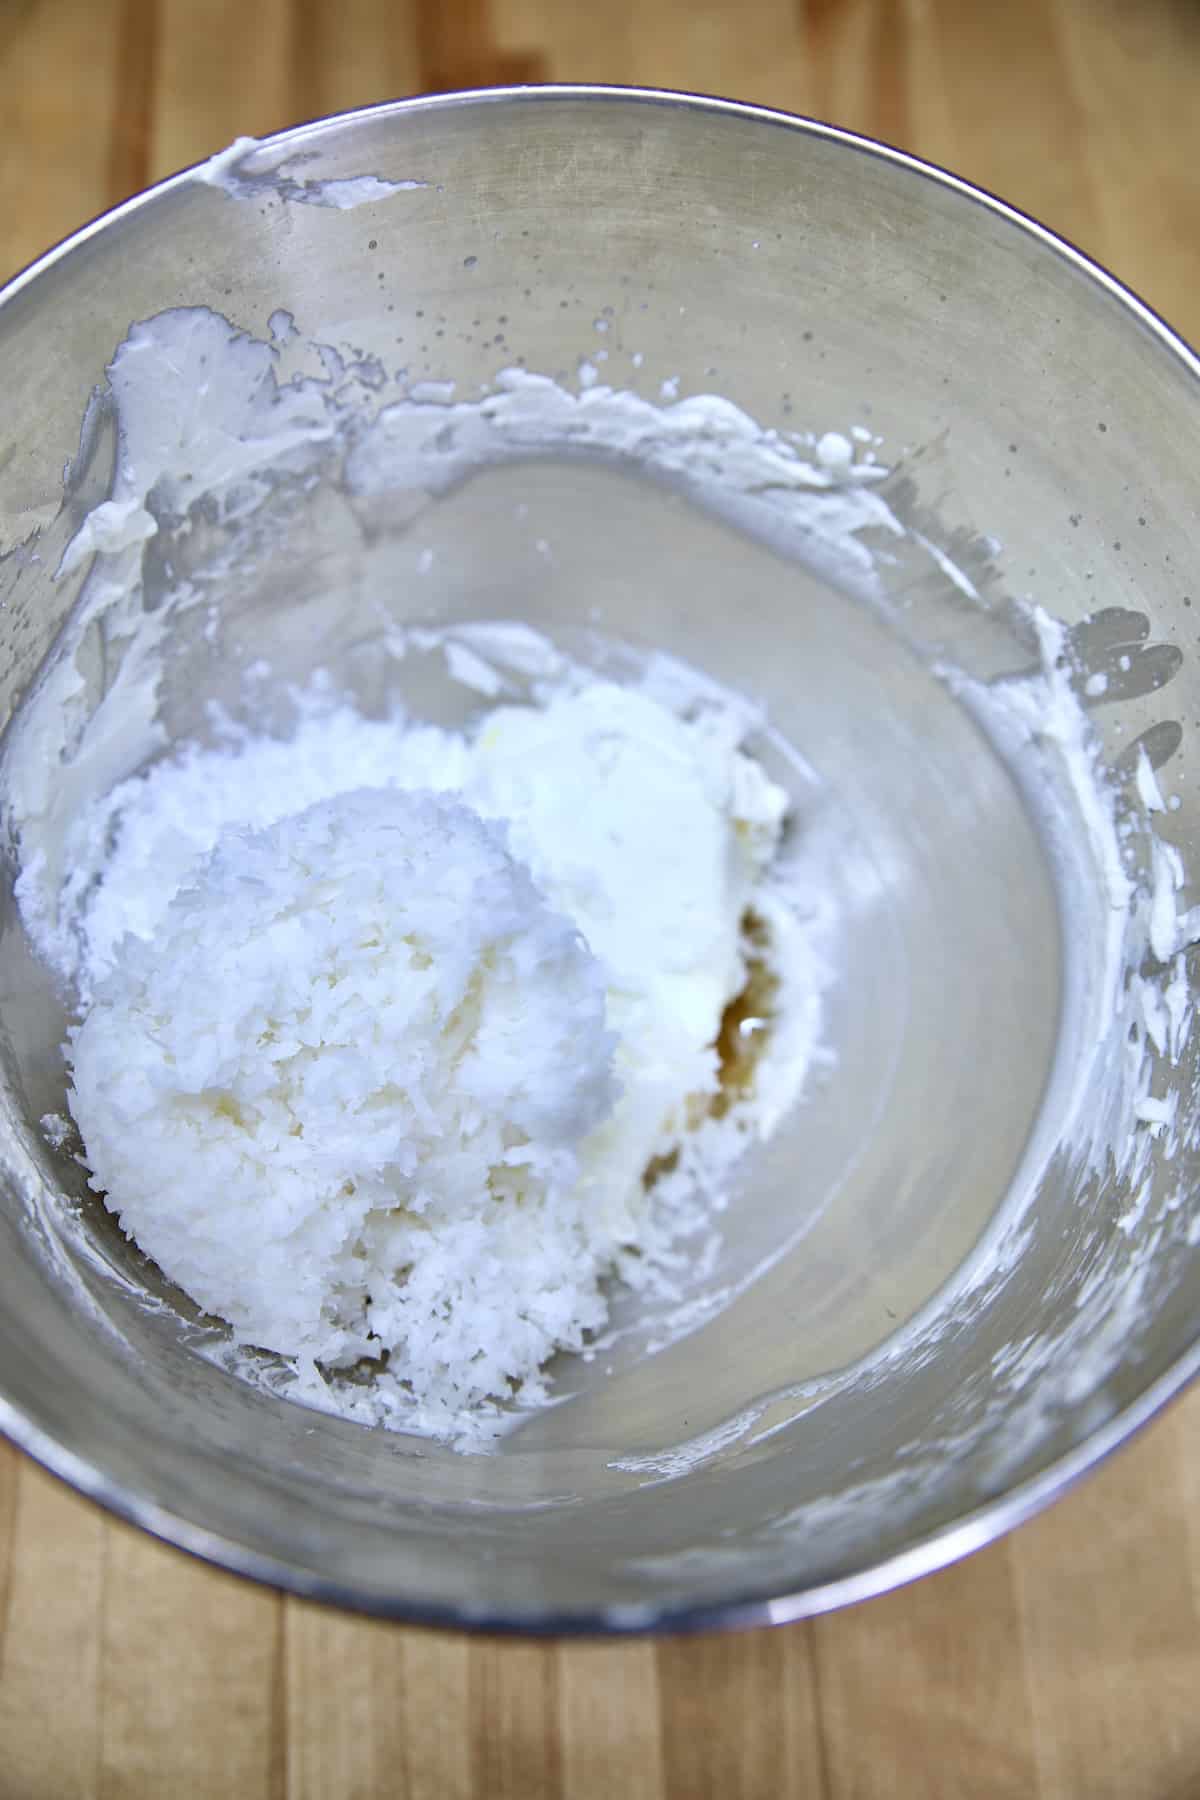 Coconut and cream cheese in a mixer bowl.